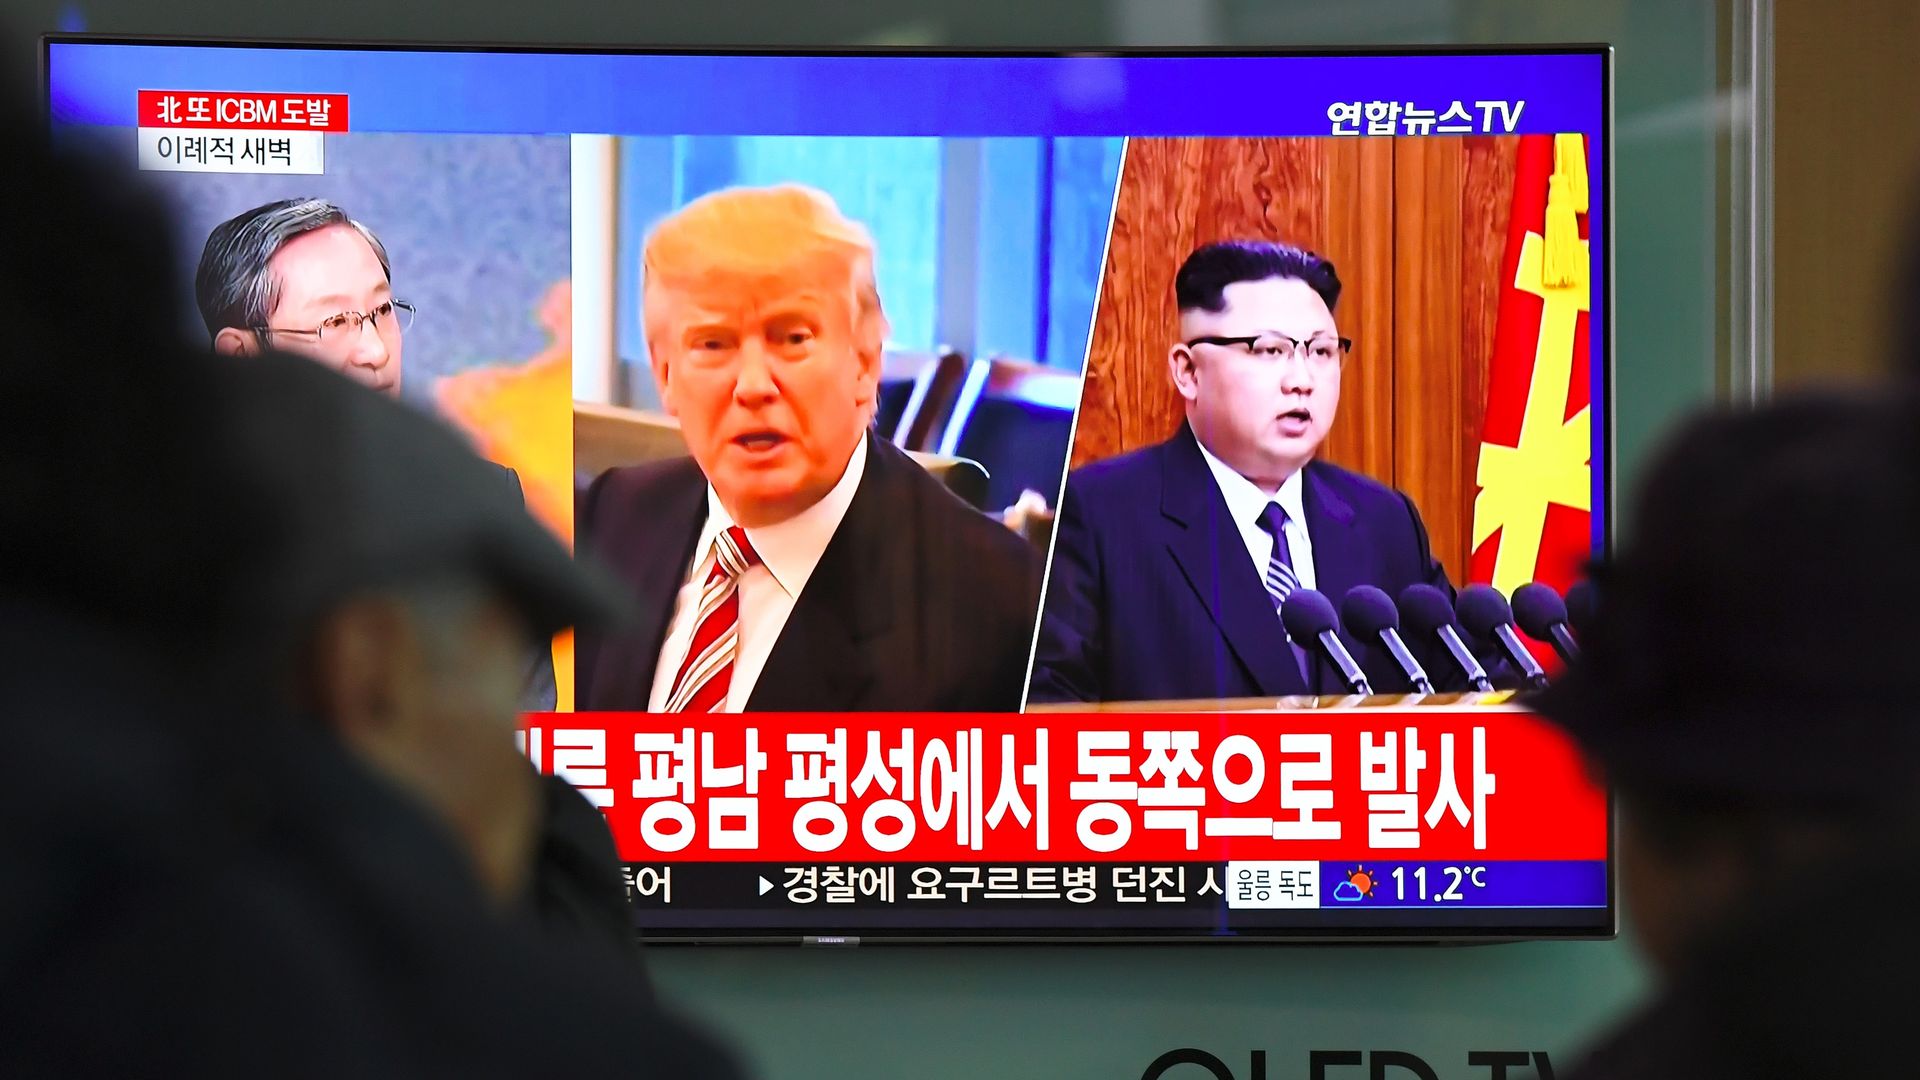 Pictures of Trump and Kim on a TV